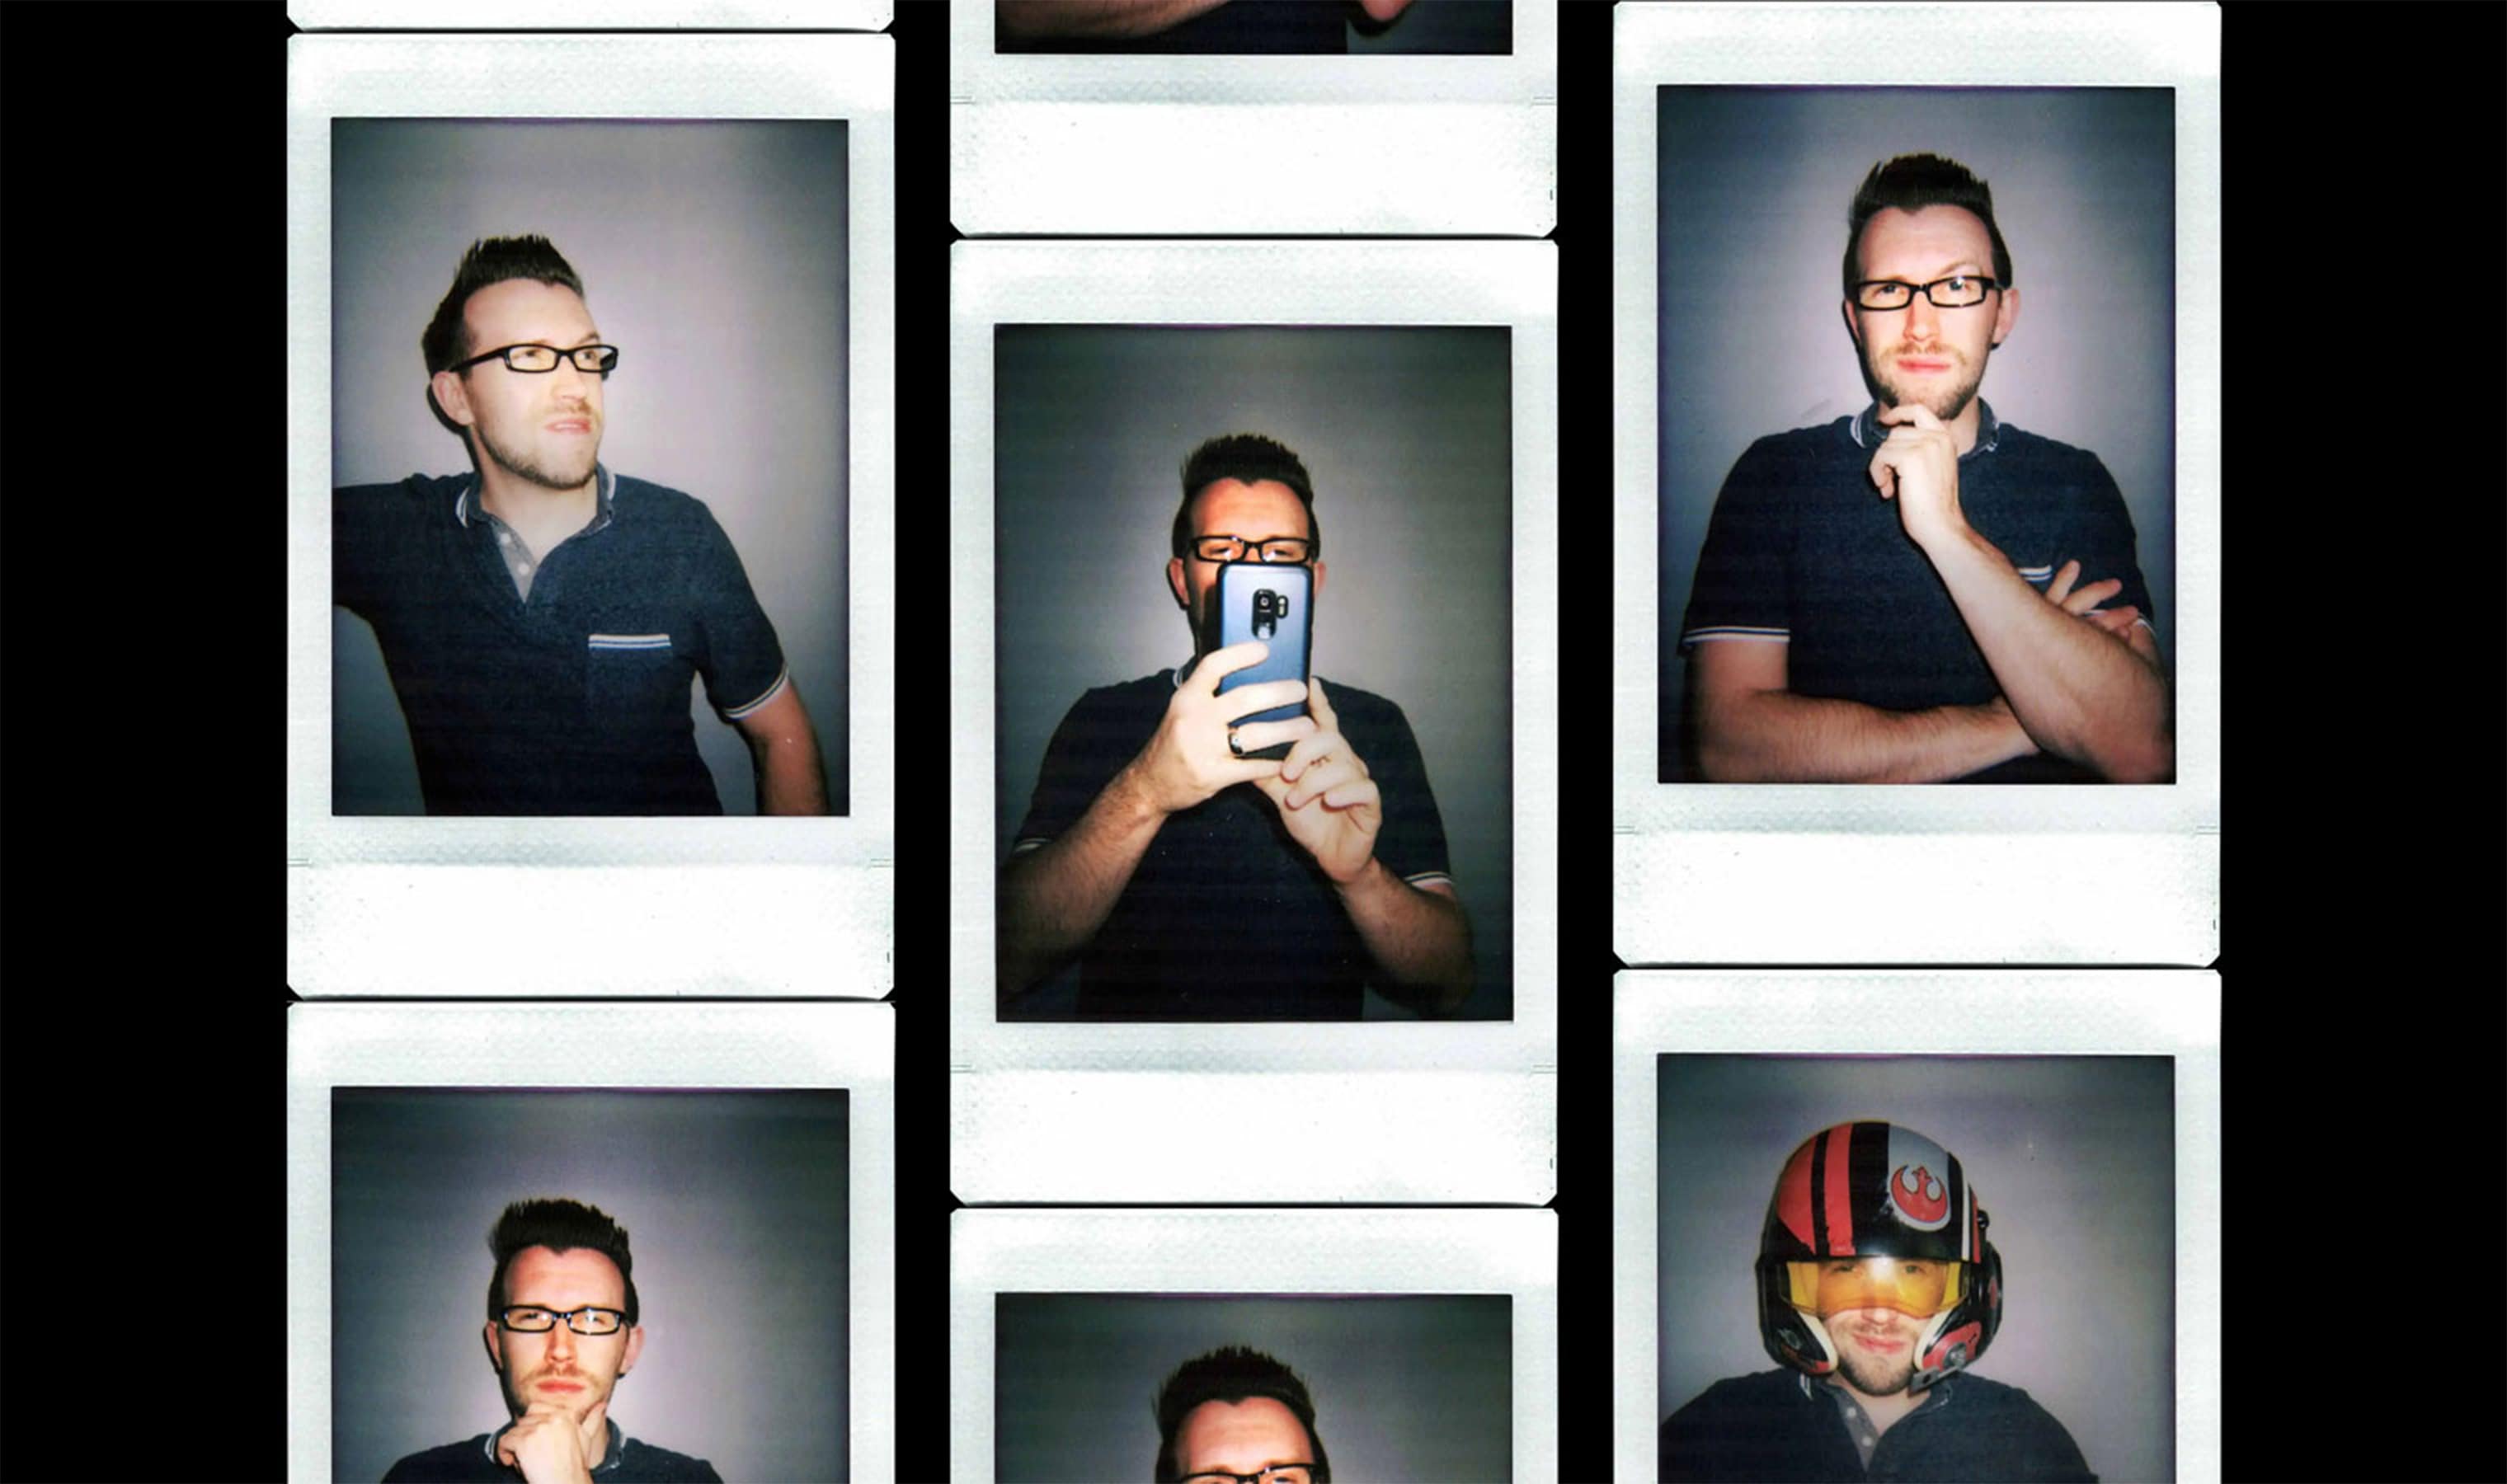 various polaroid pictures of Kevin. Some in contemplative mode, one with a helmet on and one holding his phone